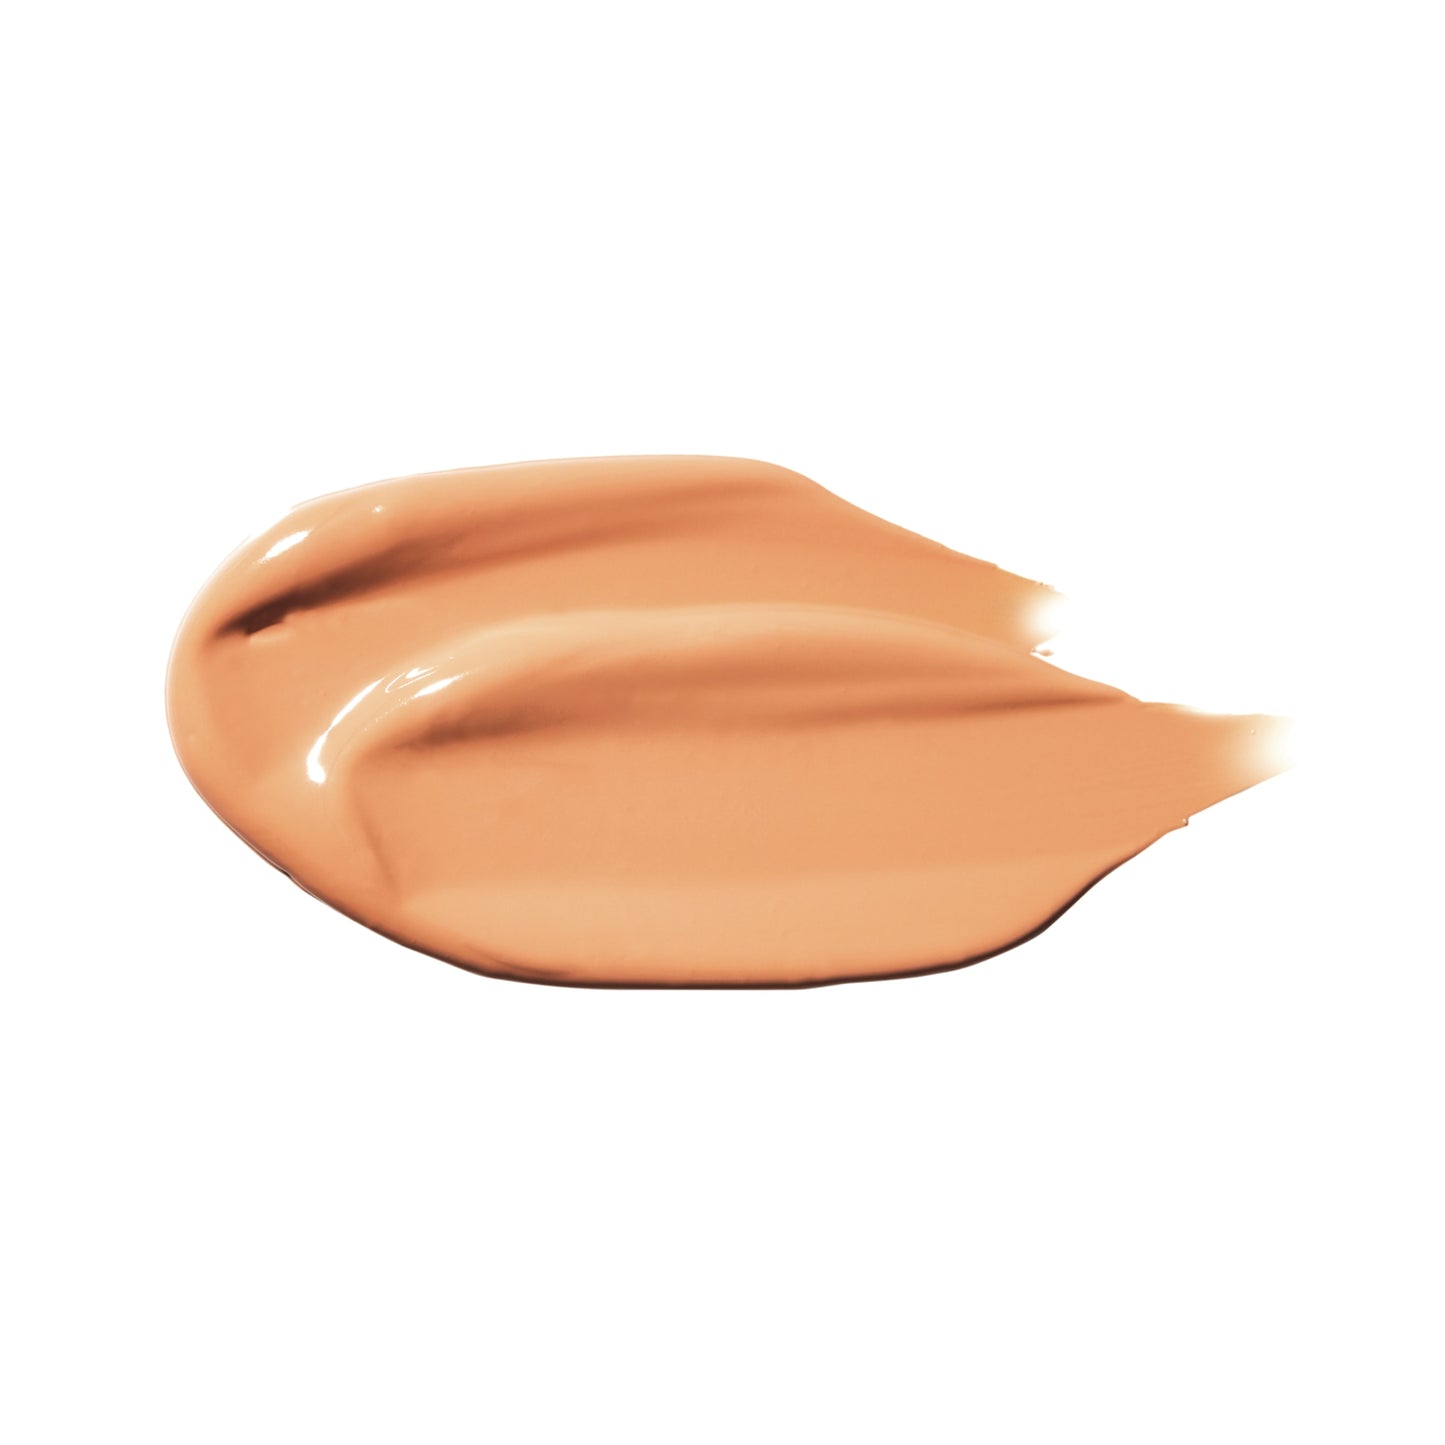 100% PURE Fruit Pigmented Healthy Foundation peach bisque